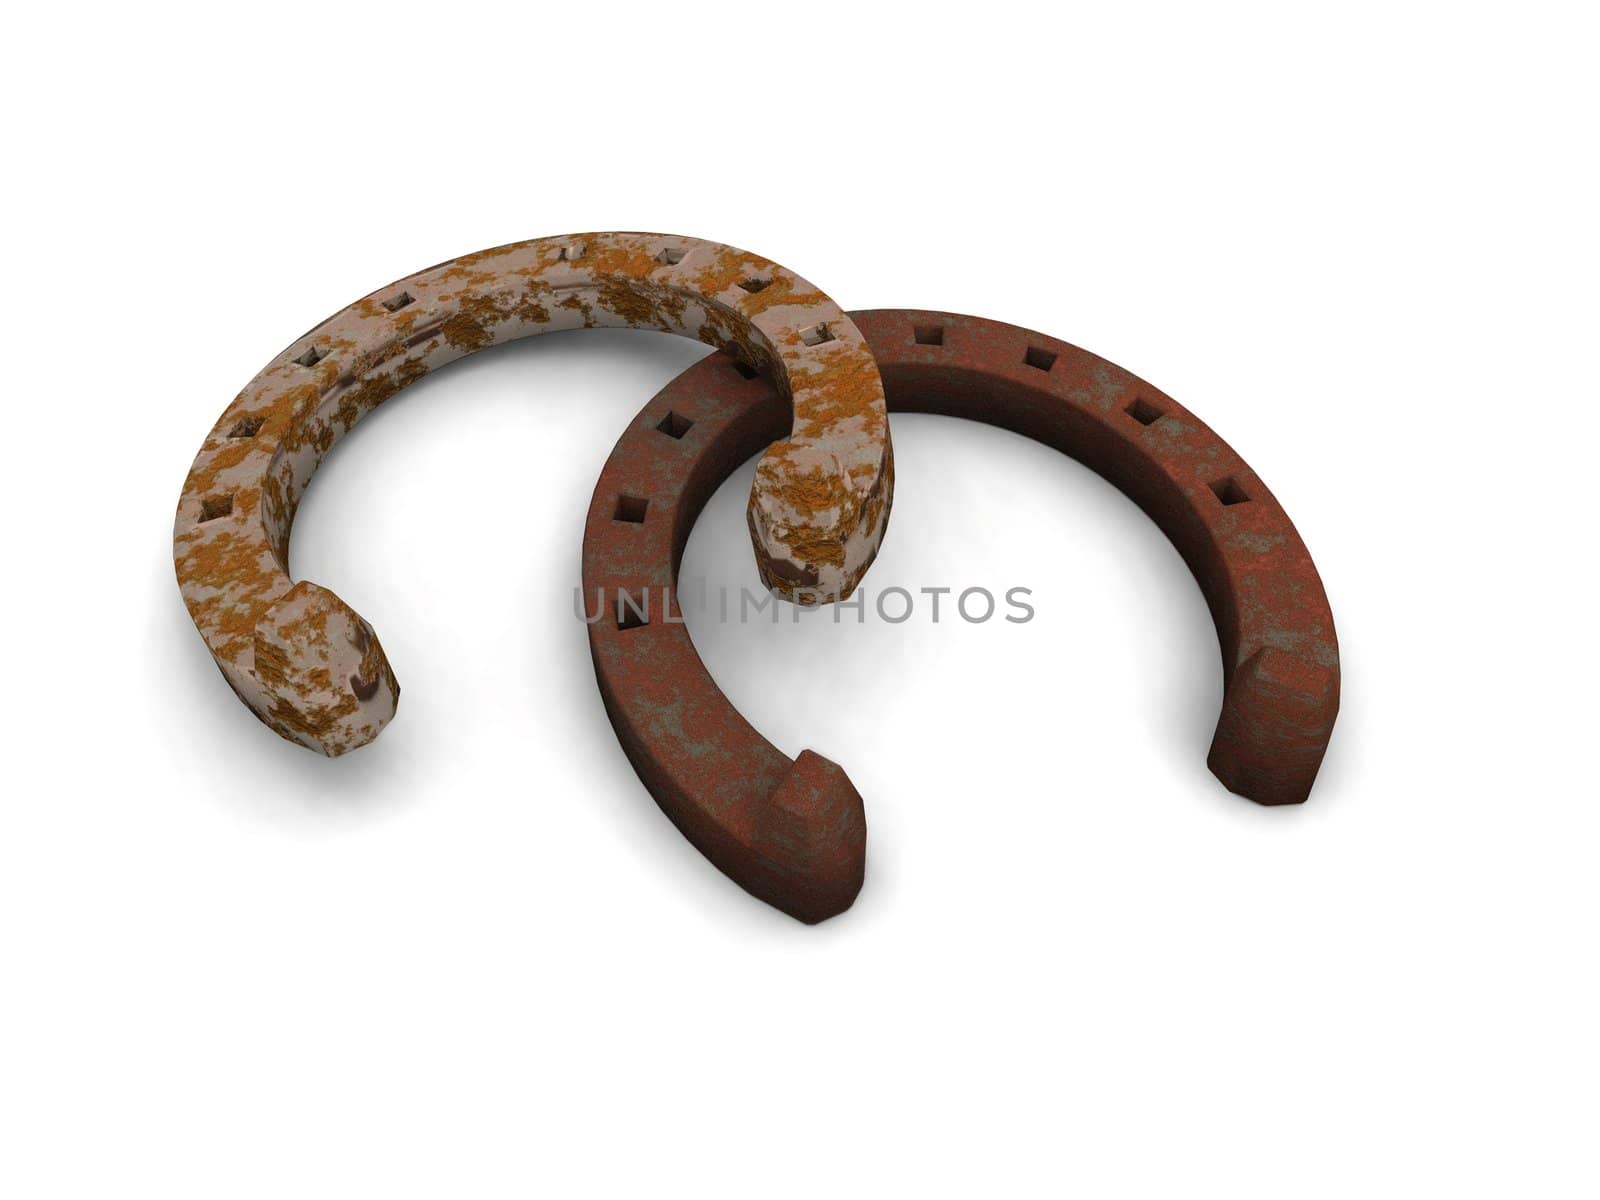 a 3D render of some rusty horse shoes